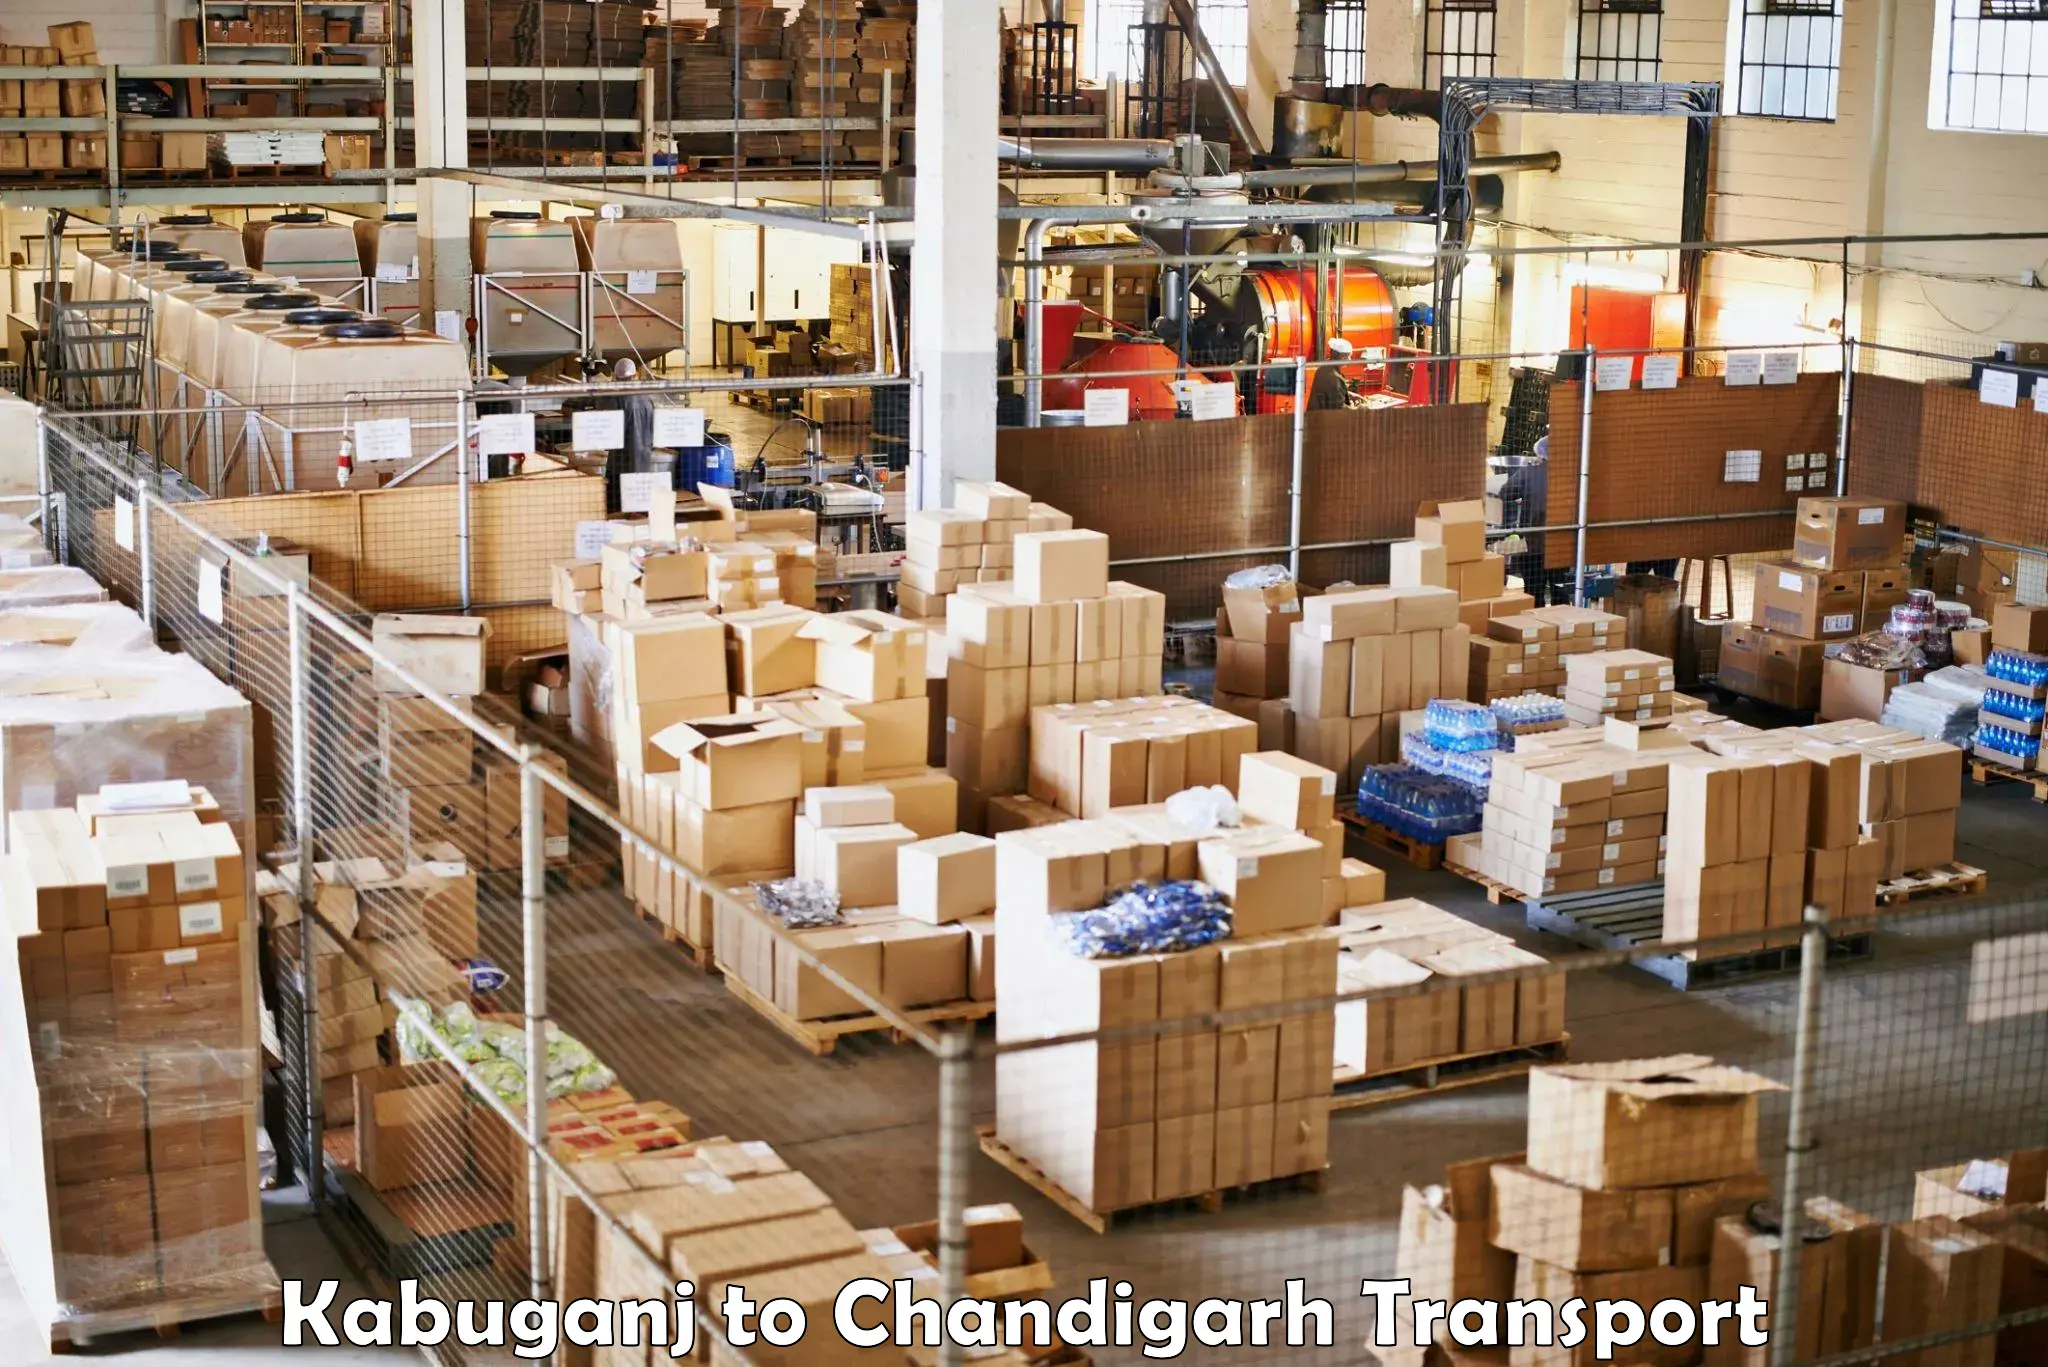 Goods delivery service Kabuganj to Chandigarh